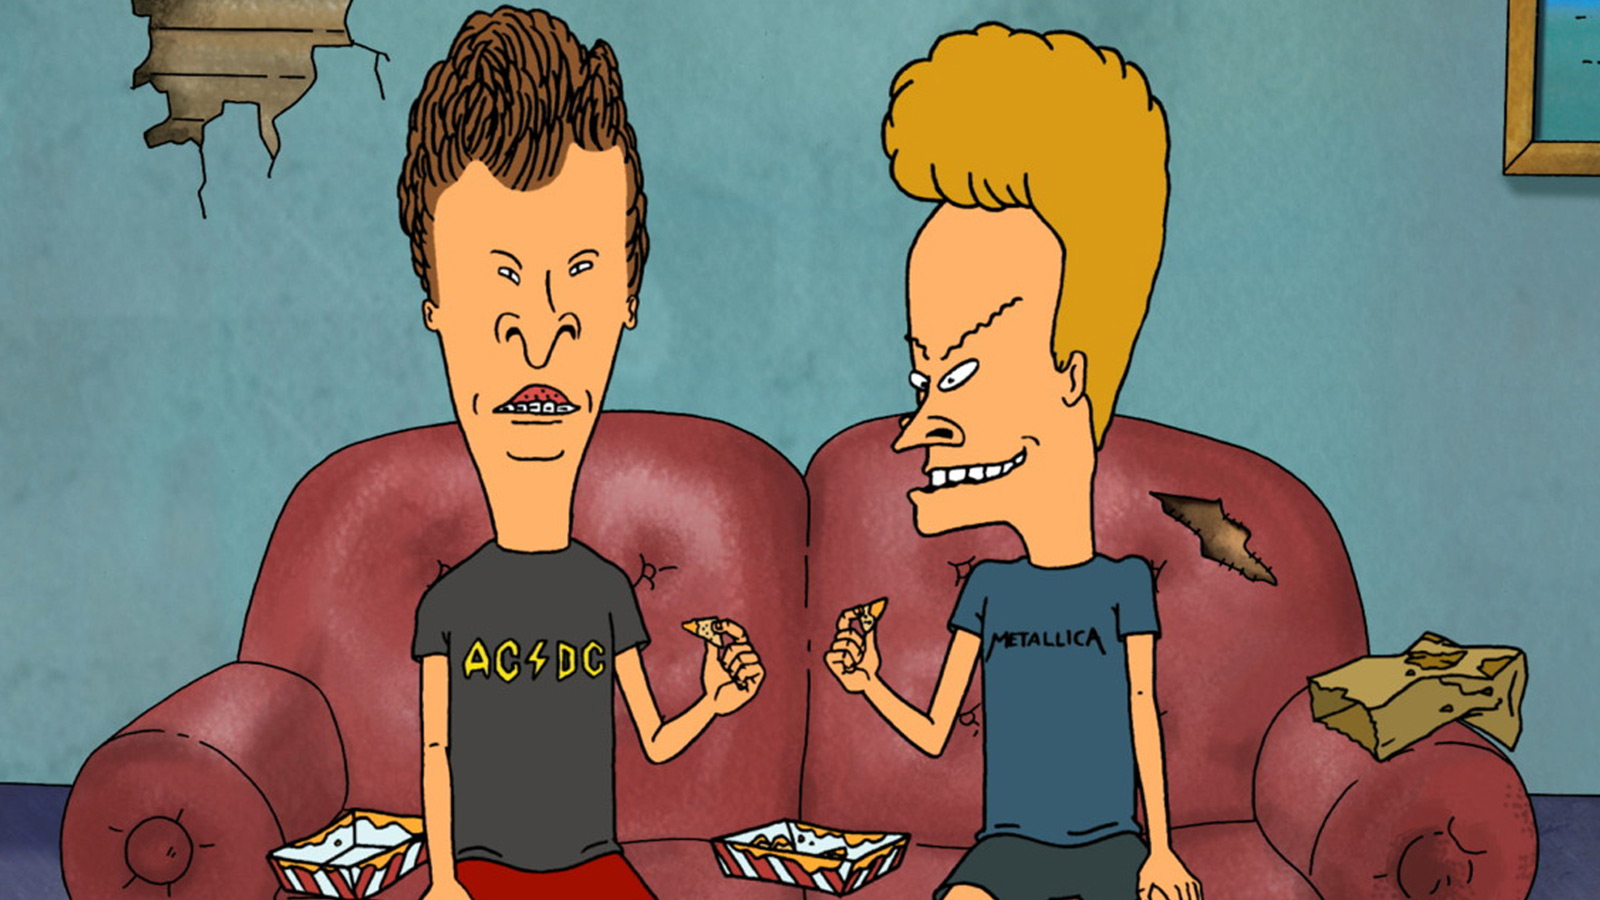 beavis-and-butthead-will-return-for-two-more-seasons-on-comedy-central-lrm